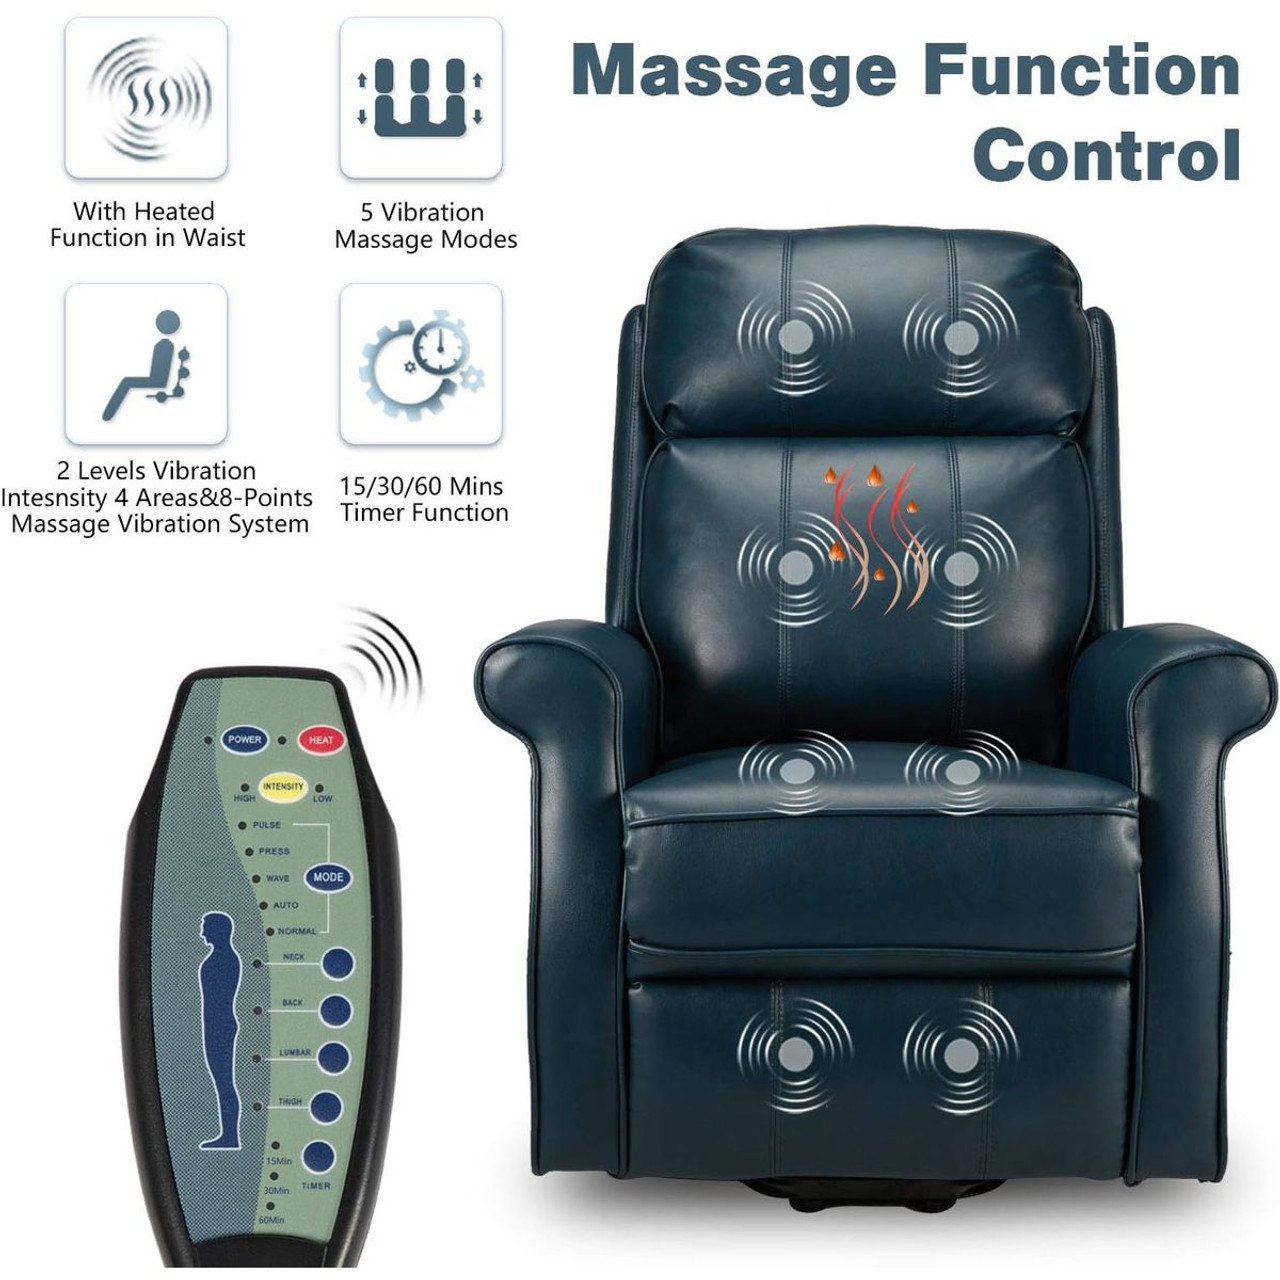 Faux Leather Electric Power Lift Recliner Chair with Heated Vibration product image